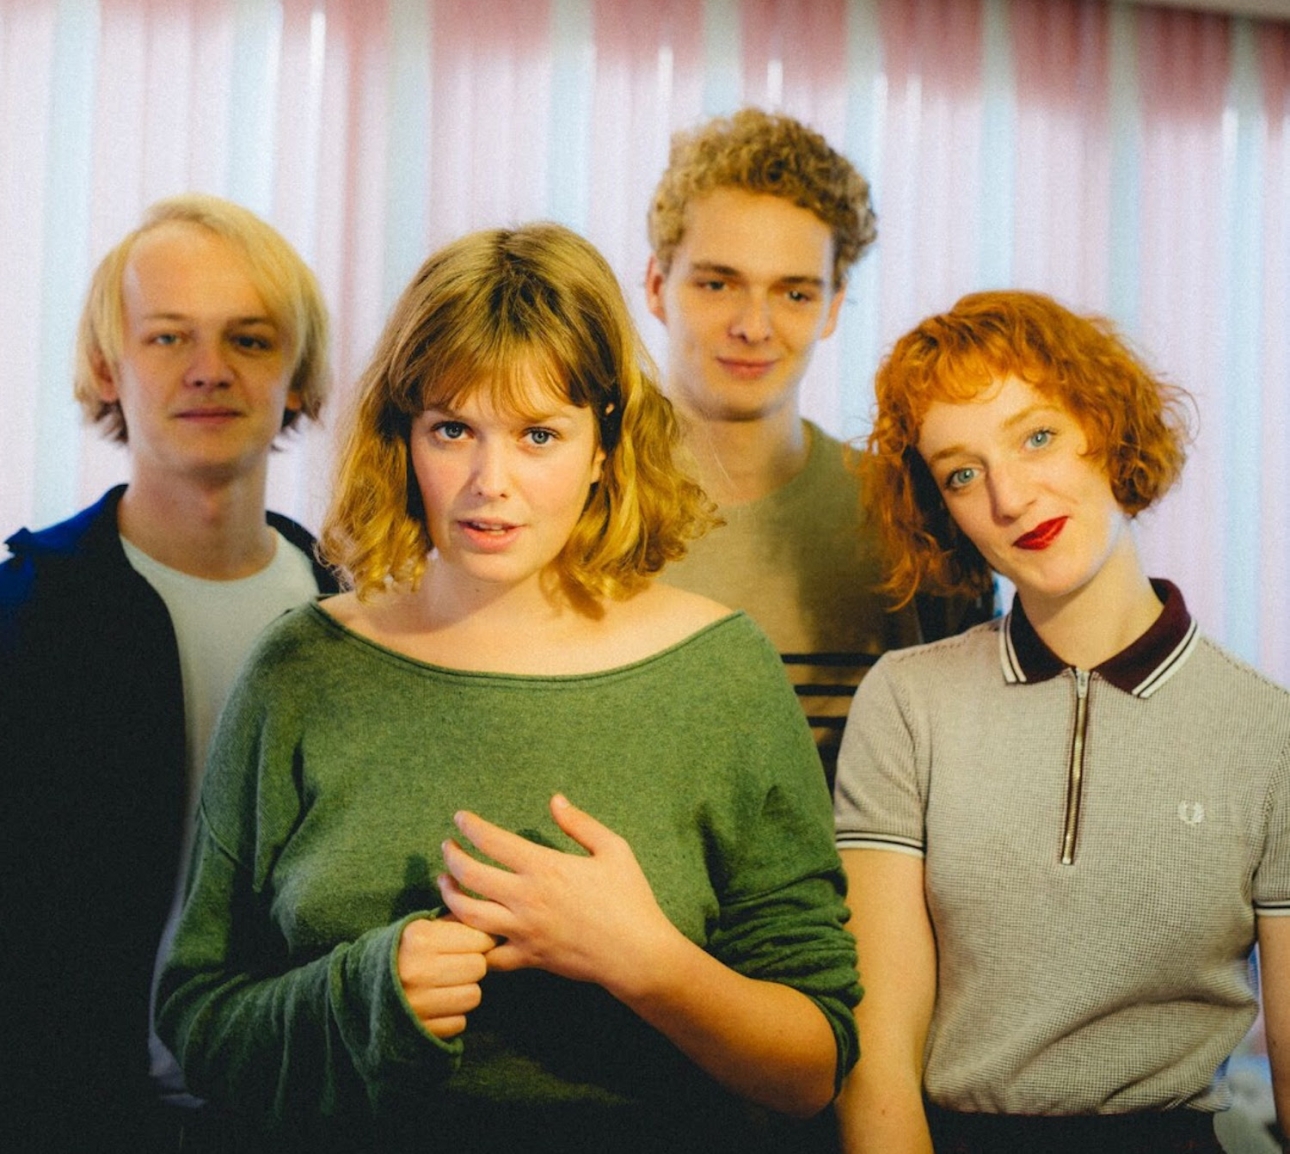 Pip Blom share Boat bonus track “Sell By Date” to coincide with deluxe